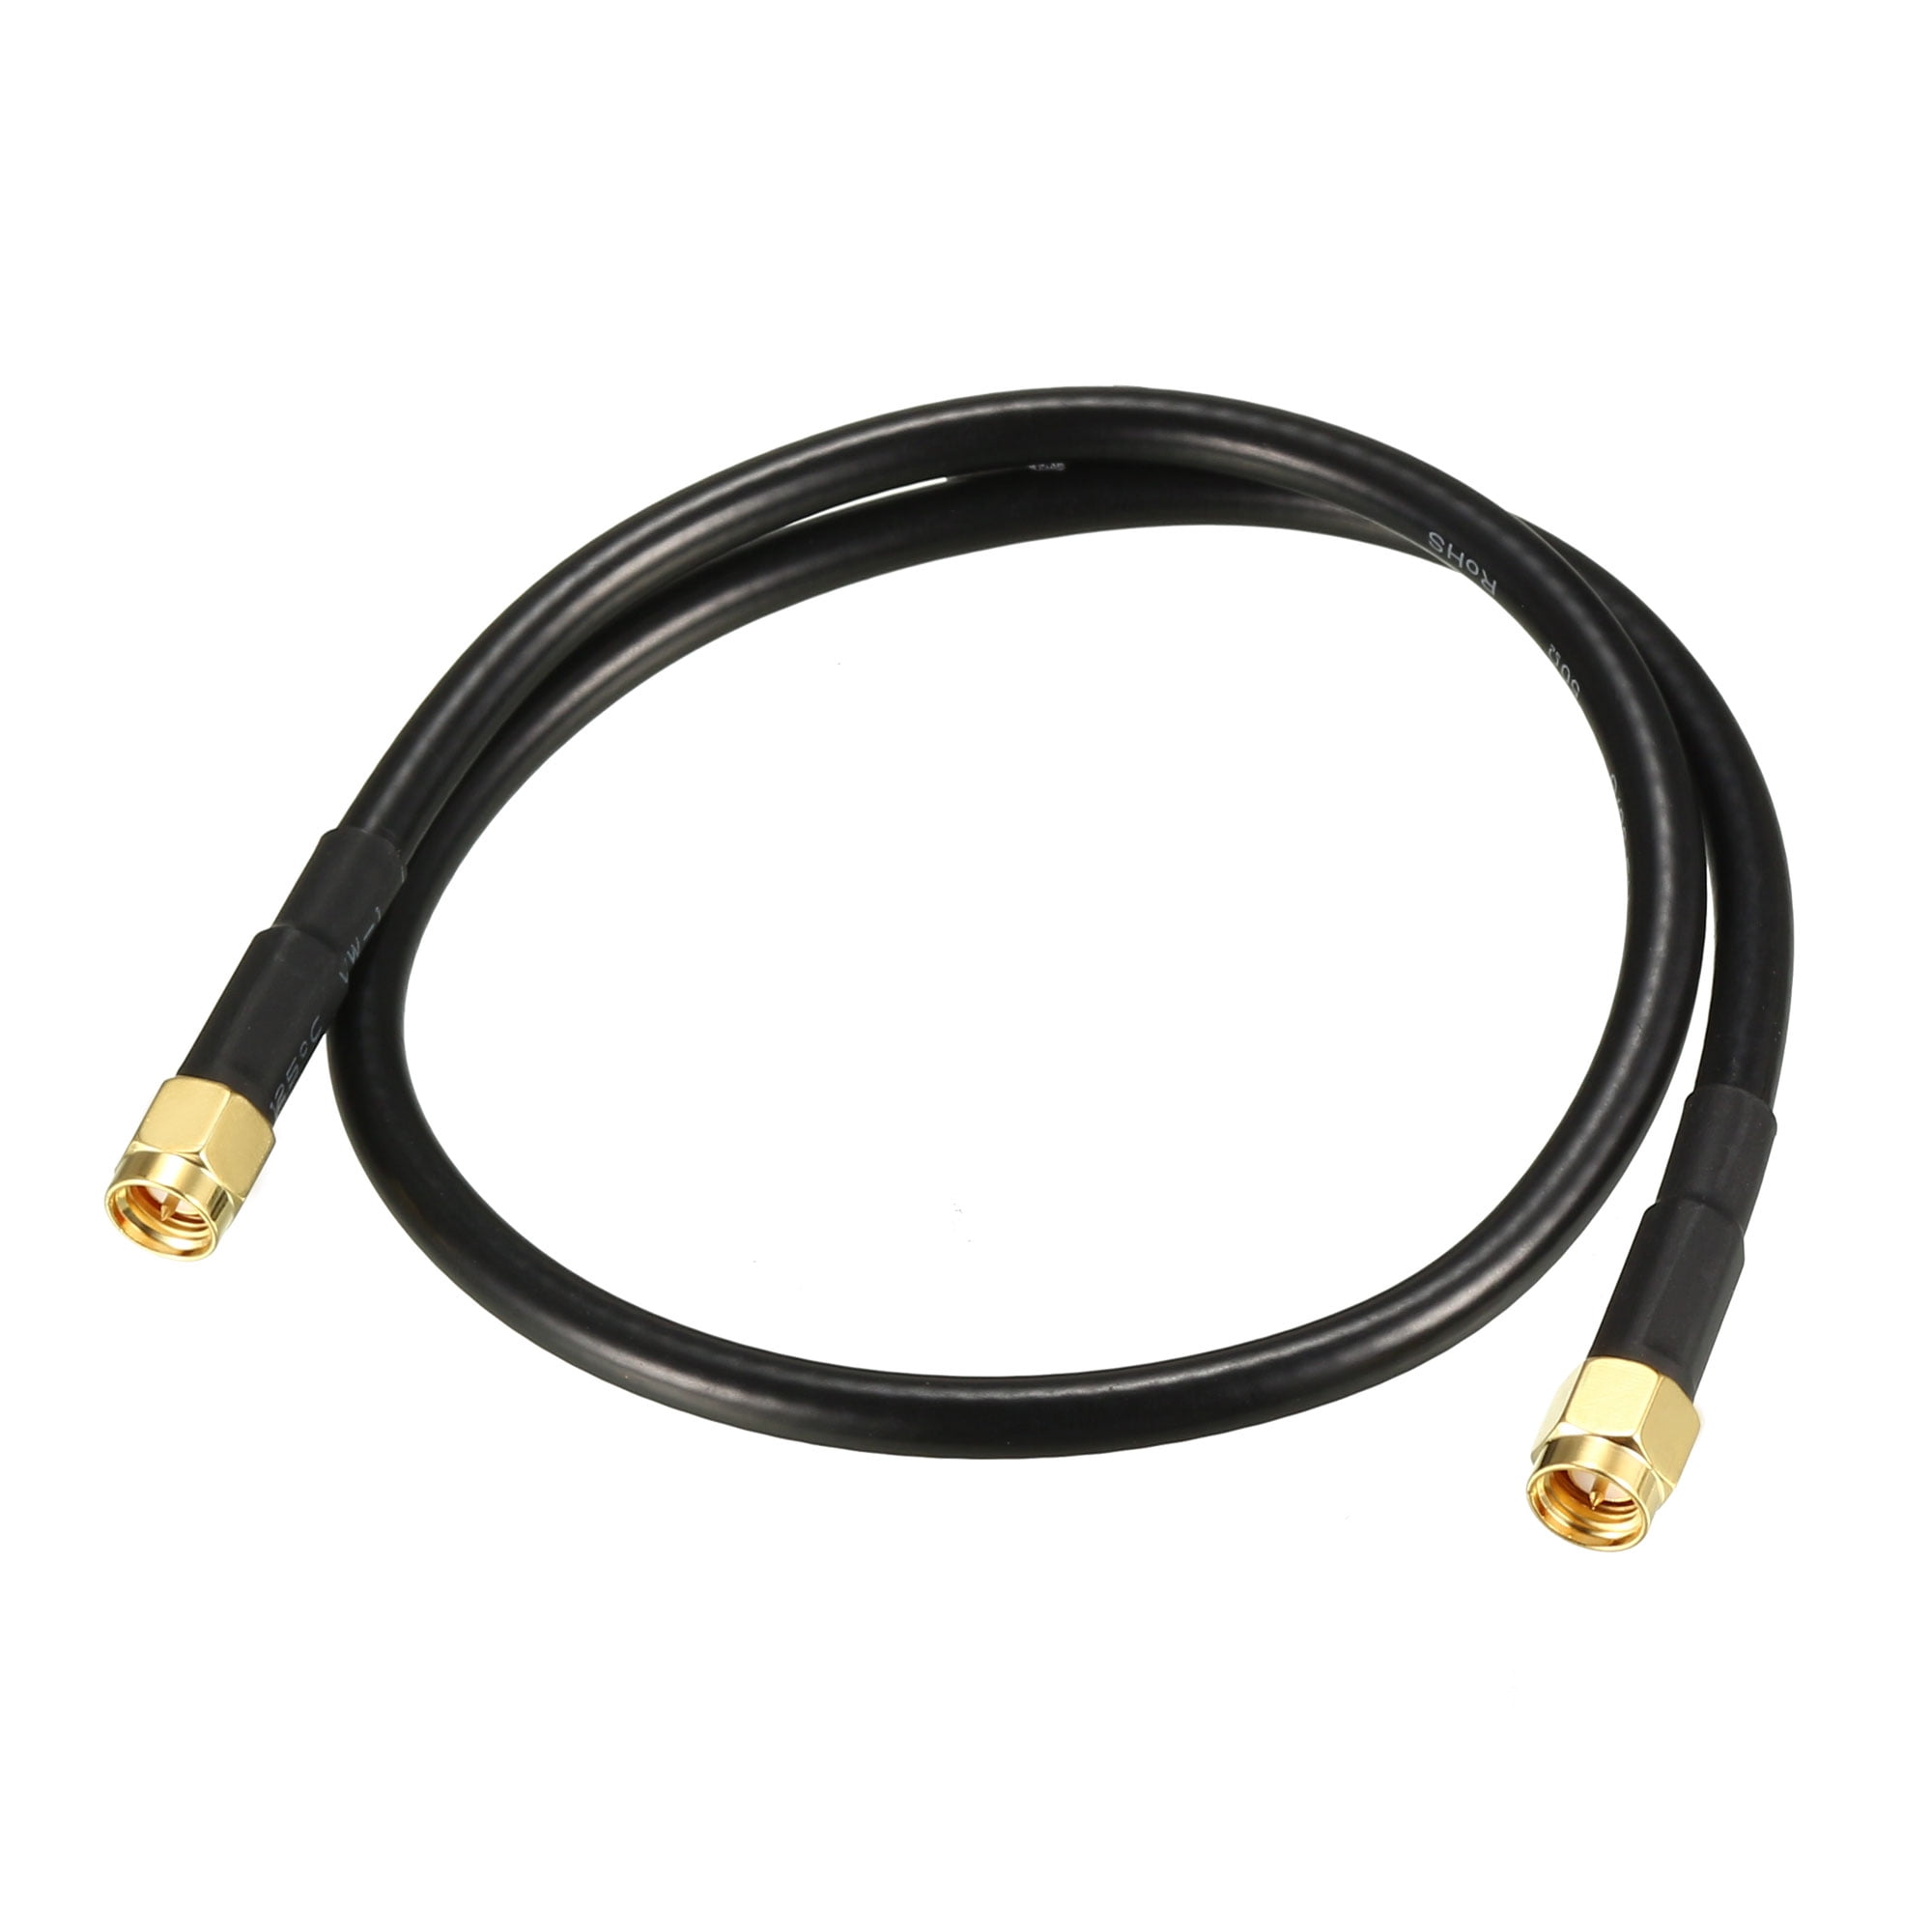 Antenna Extension Cable SMA Male to SMA Male coaxial Cable RG58 50 ohms 6 feet 2 Pieces 